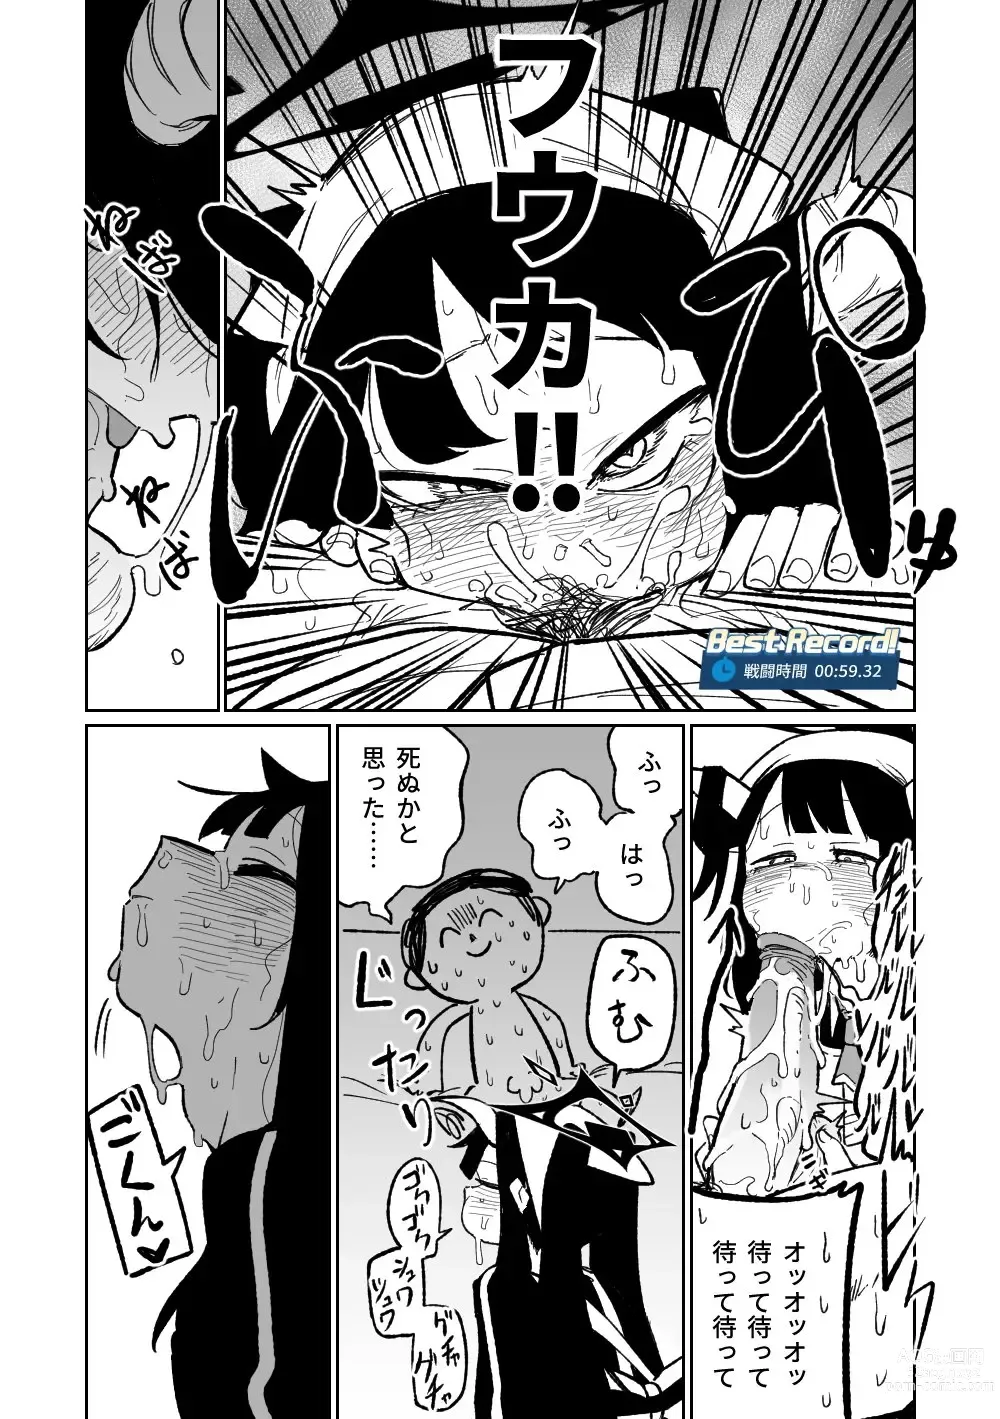 Page 7 of doujinshi 風華的飲食管理